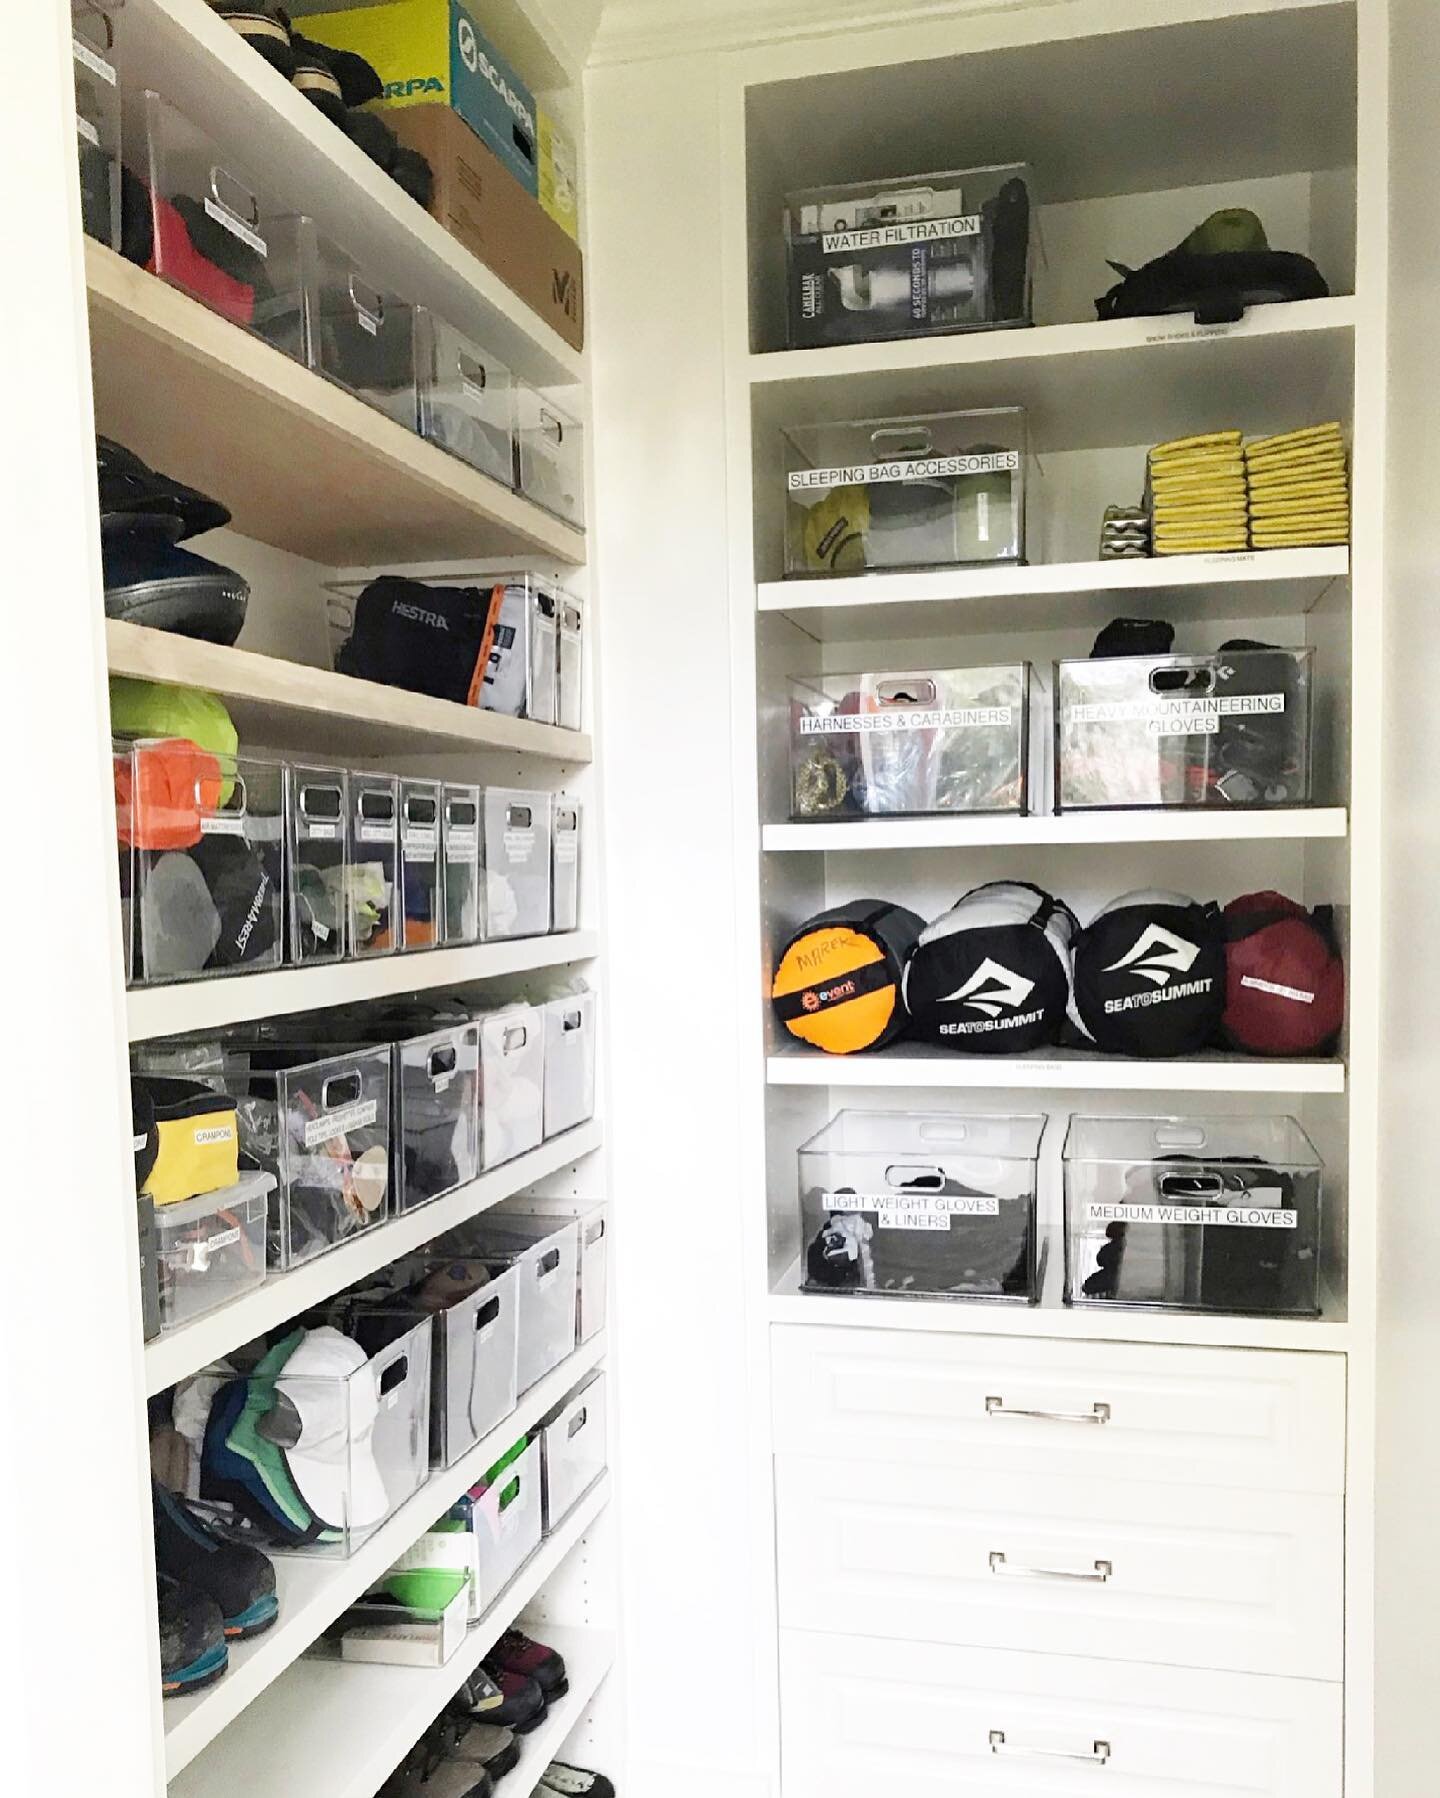 An outdoorsman&rsquo;s dream!
From gloves🧤to hiking boots 🥾 this closet&rsquo;s got ya covered ⛰!
.
.
#crosswellorganizing #professionalorganizer #organizer #outdoors #outdoorsman #gloves #boots #hikingboots #hiking #mountains #colorado